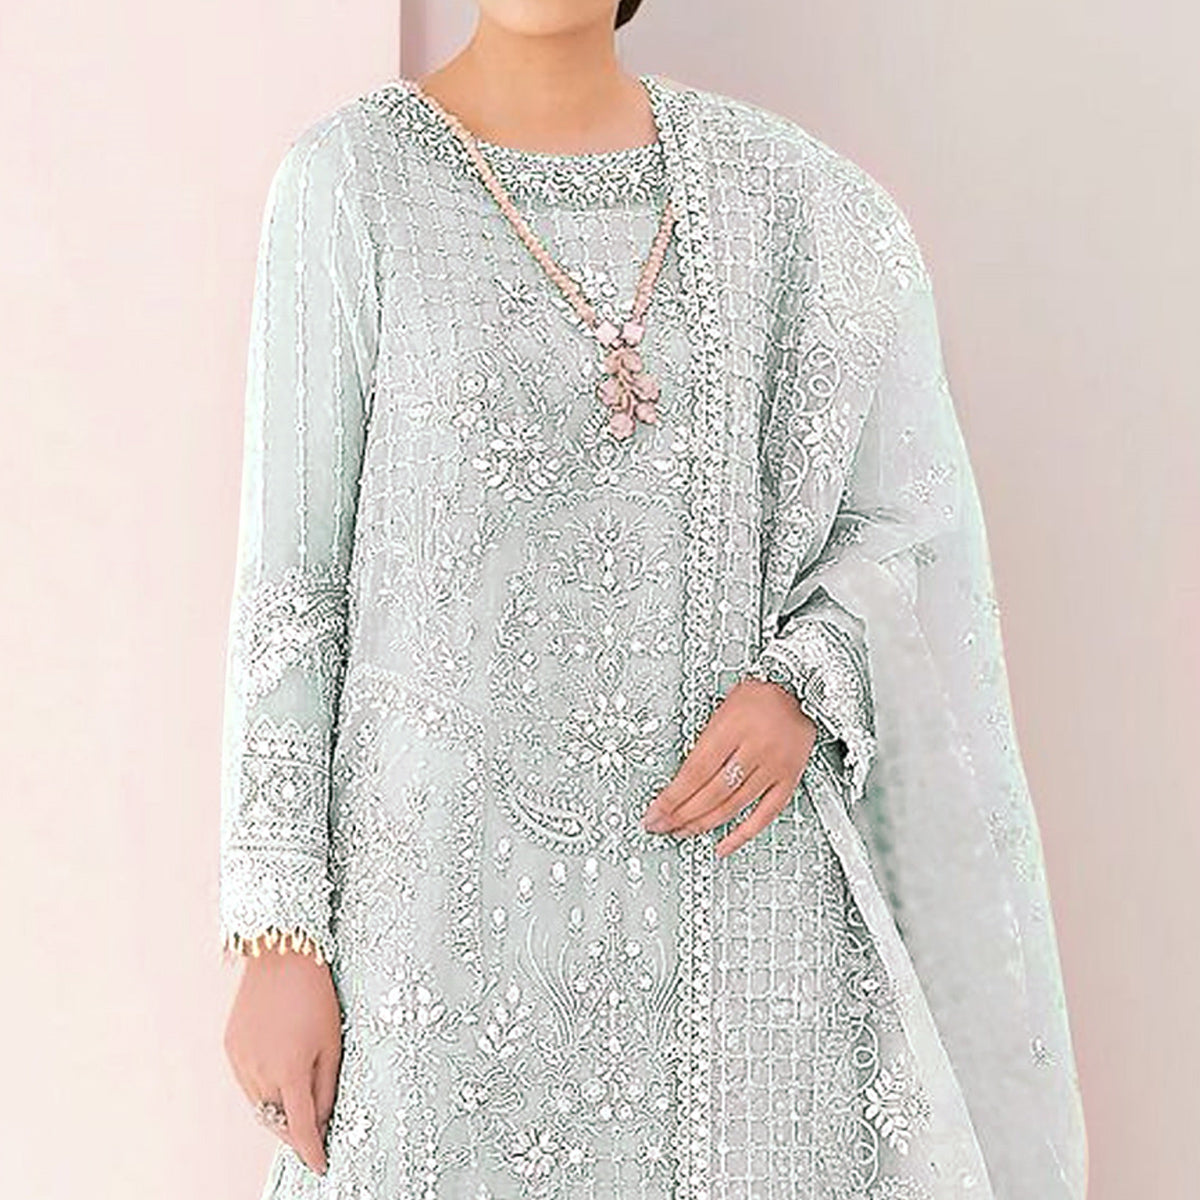 Sky Blue Sequins Embroidered Georgette Sharara Suit